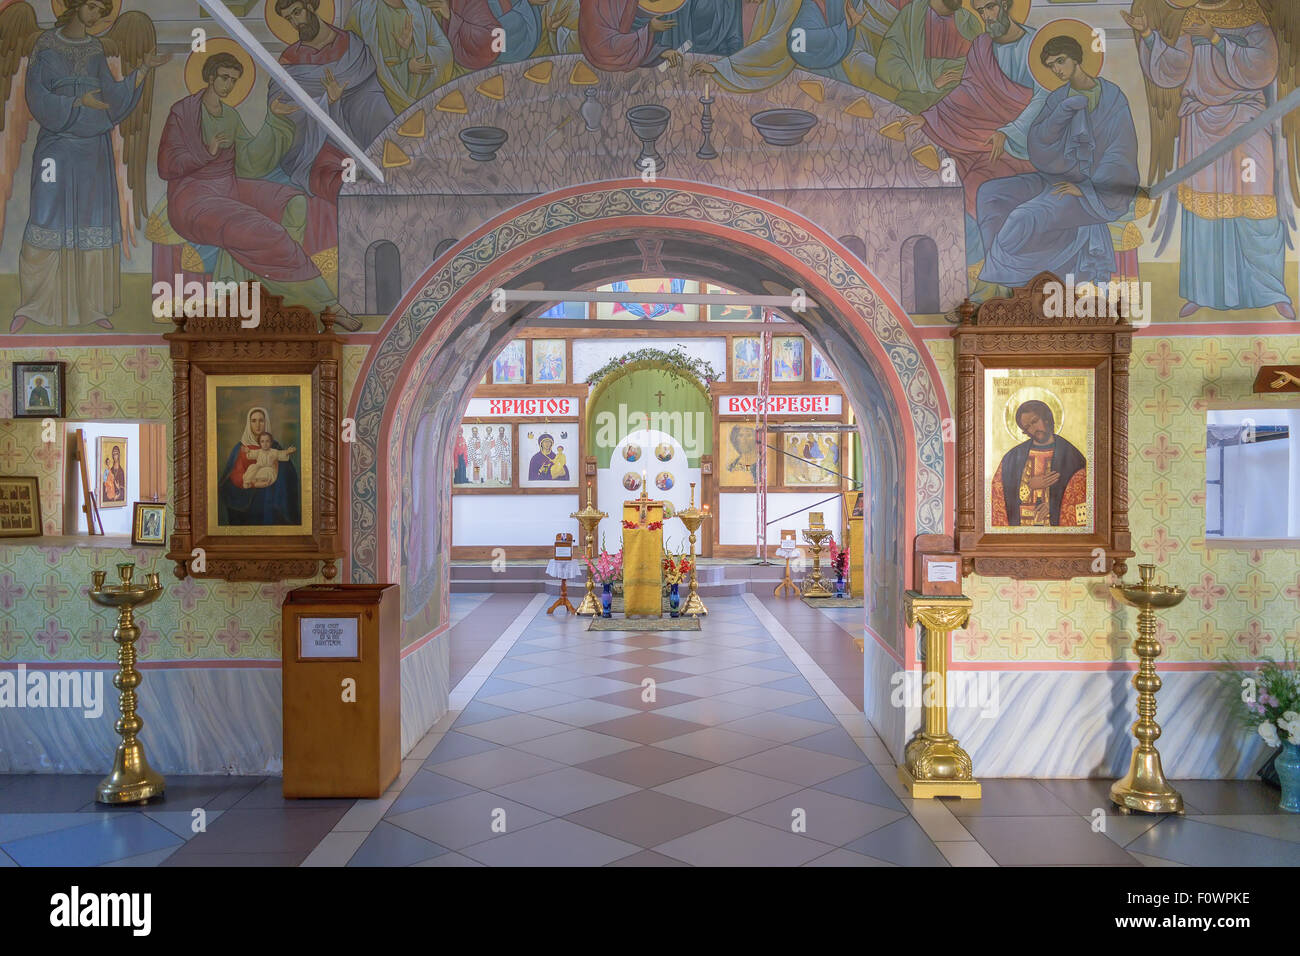 Archway to iconostasis and altar through halls of worship in church. Stock Photo